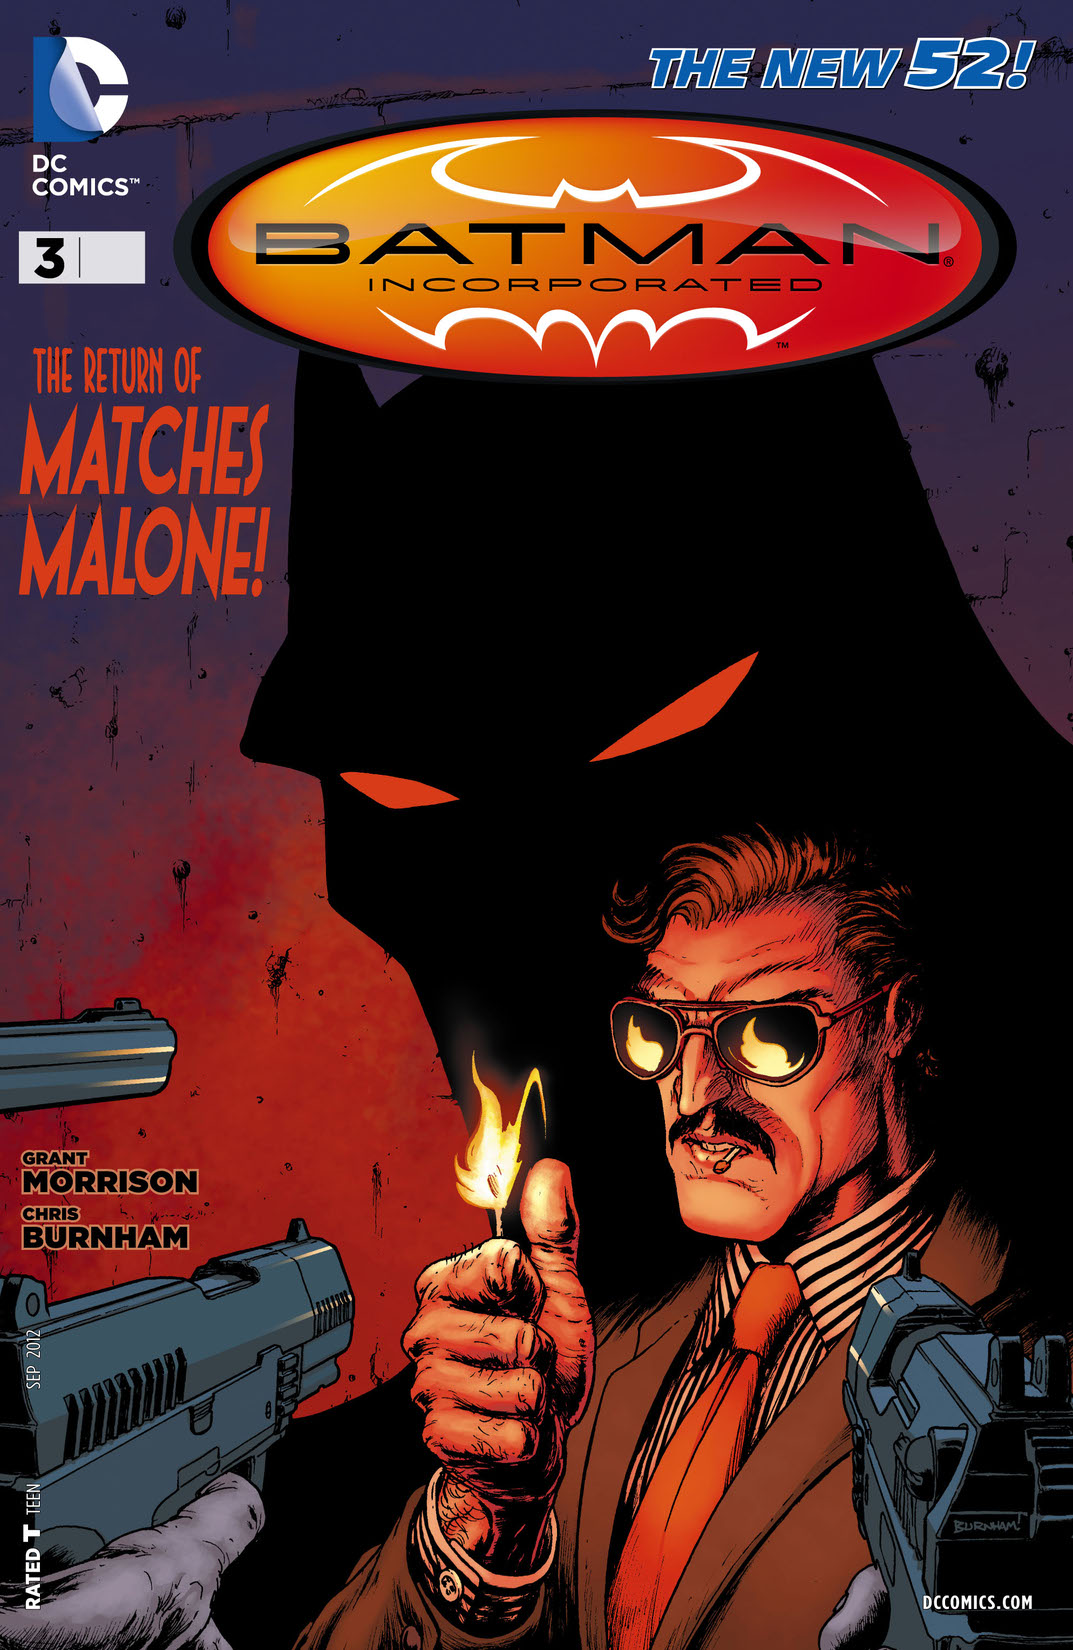 Batman Incorporated (2012-) #3 preview images